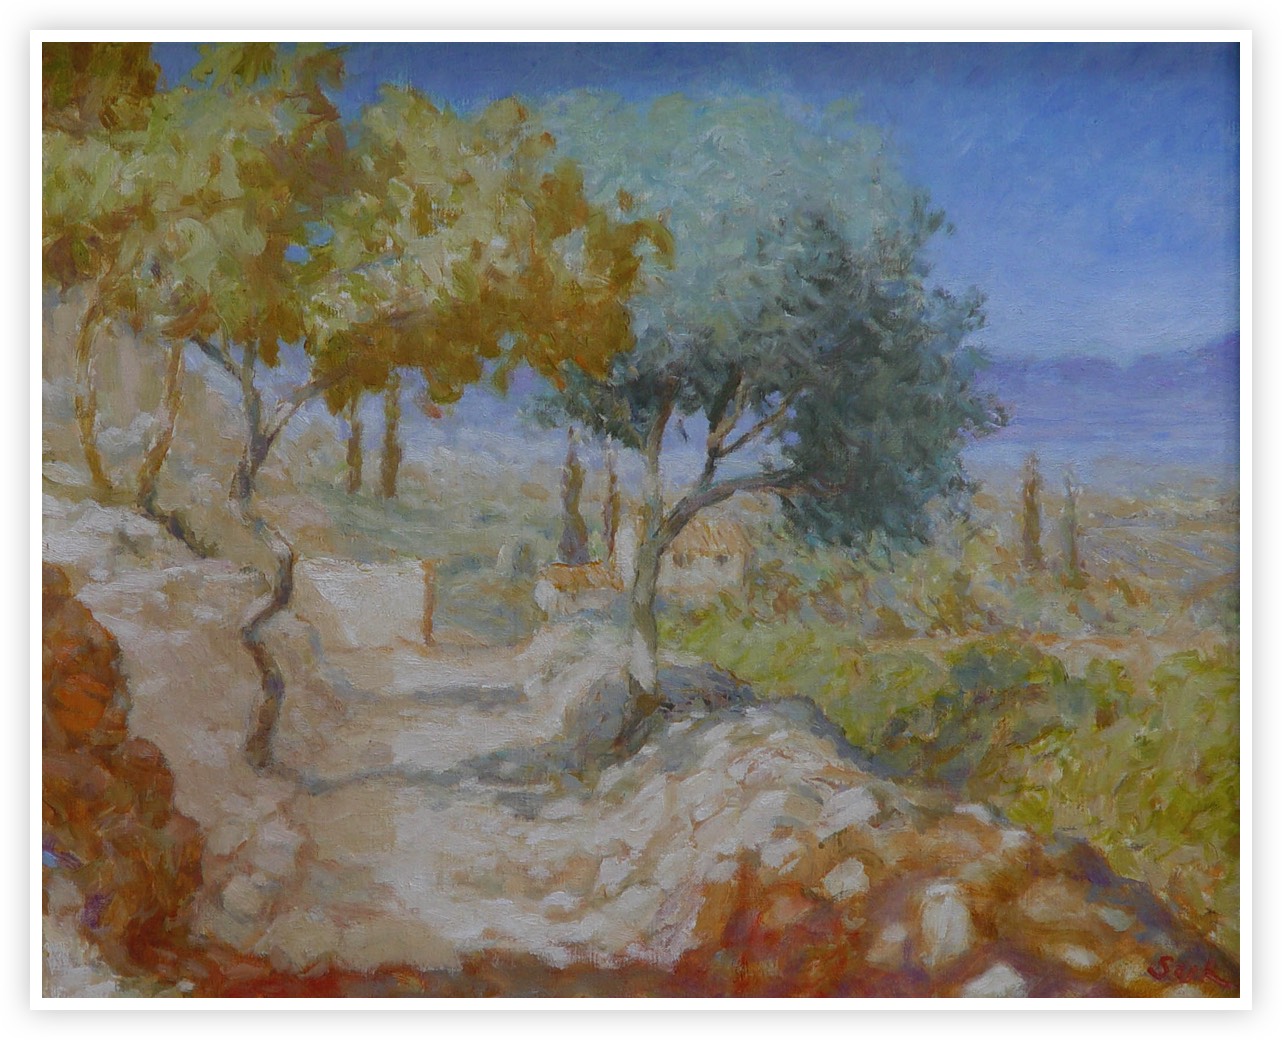 Between the Fig and the Olive Tree Ardeche - oil on canvas - 25inches X 20inches - SOLD